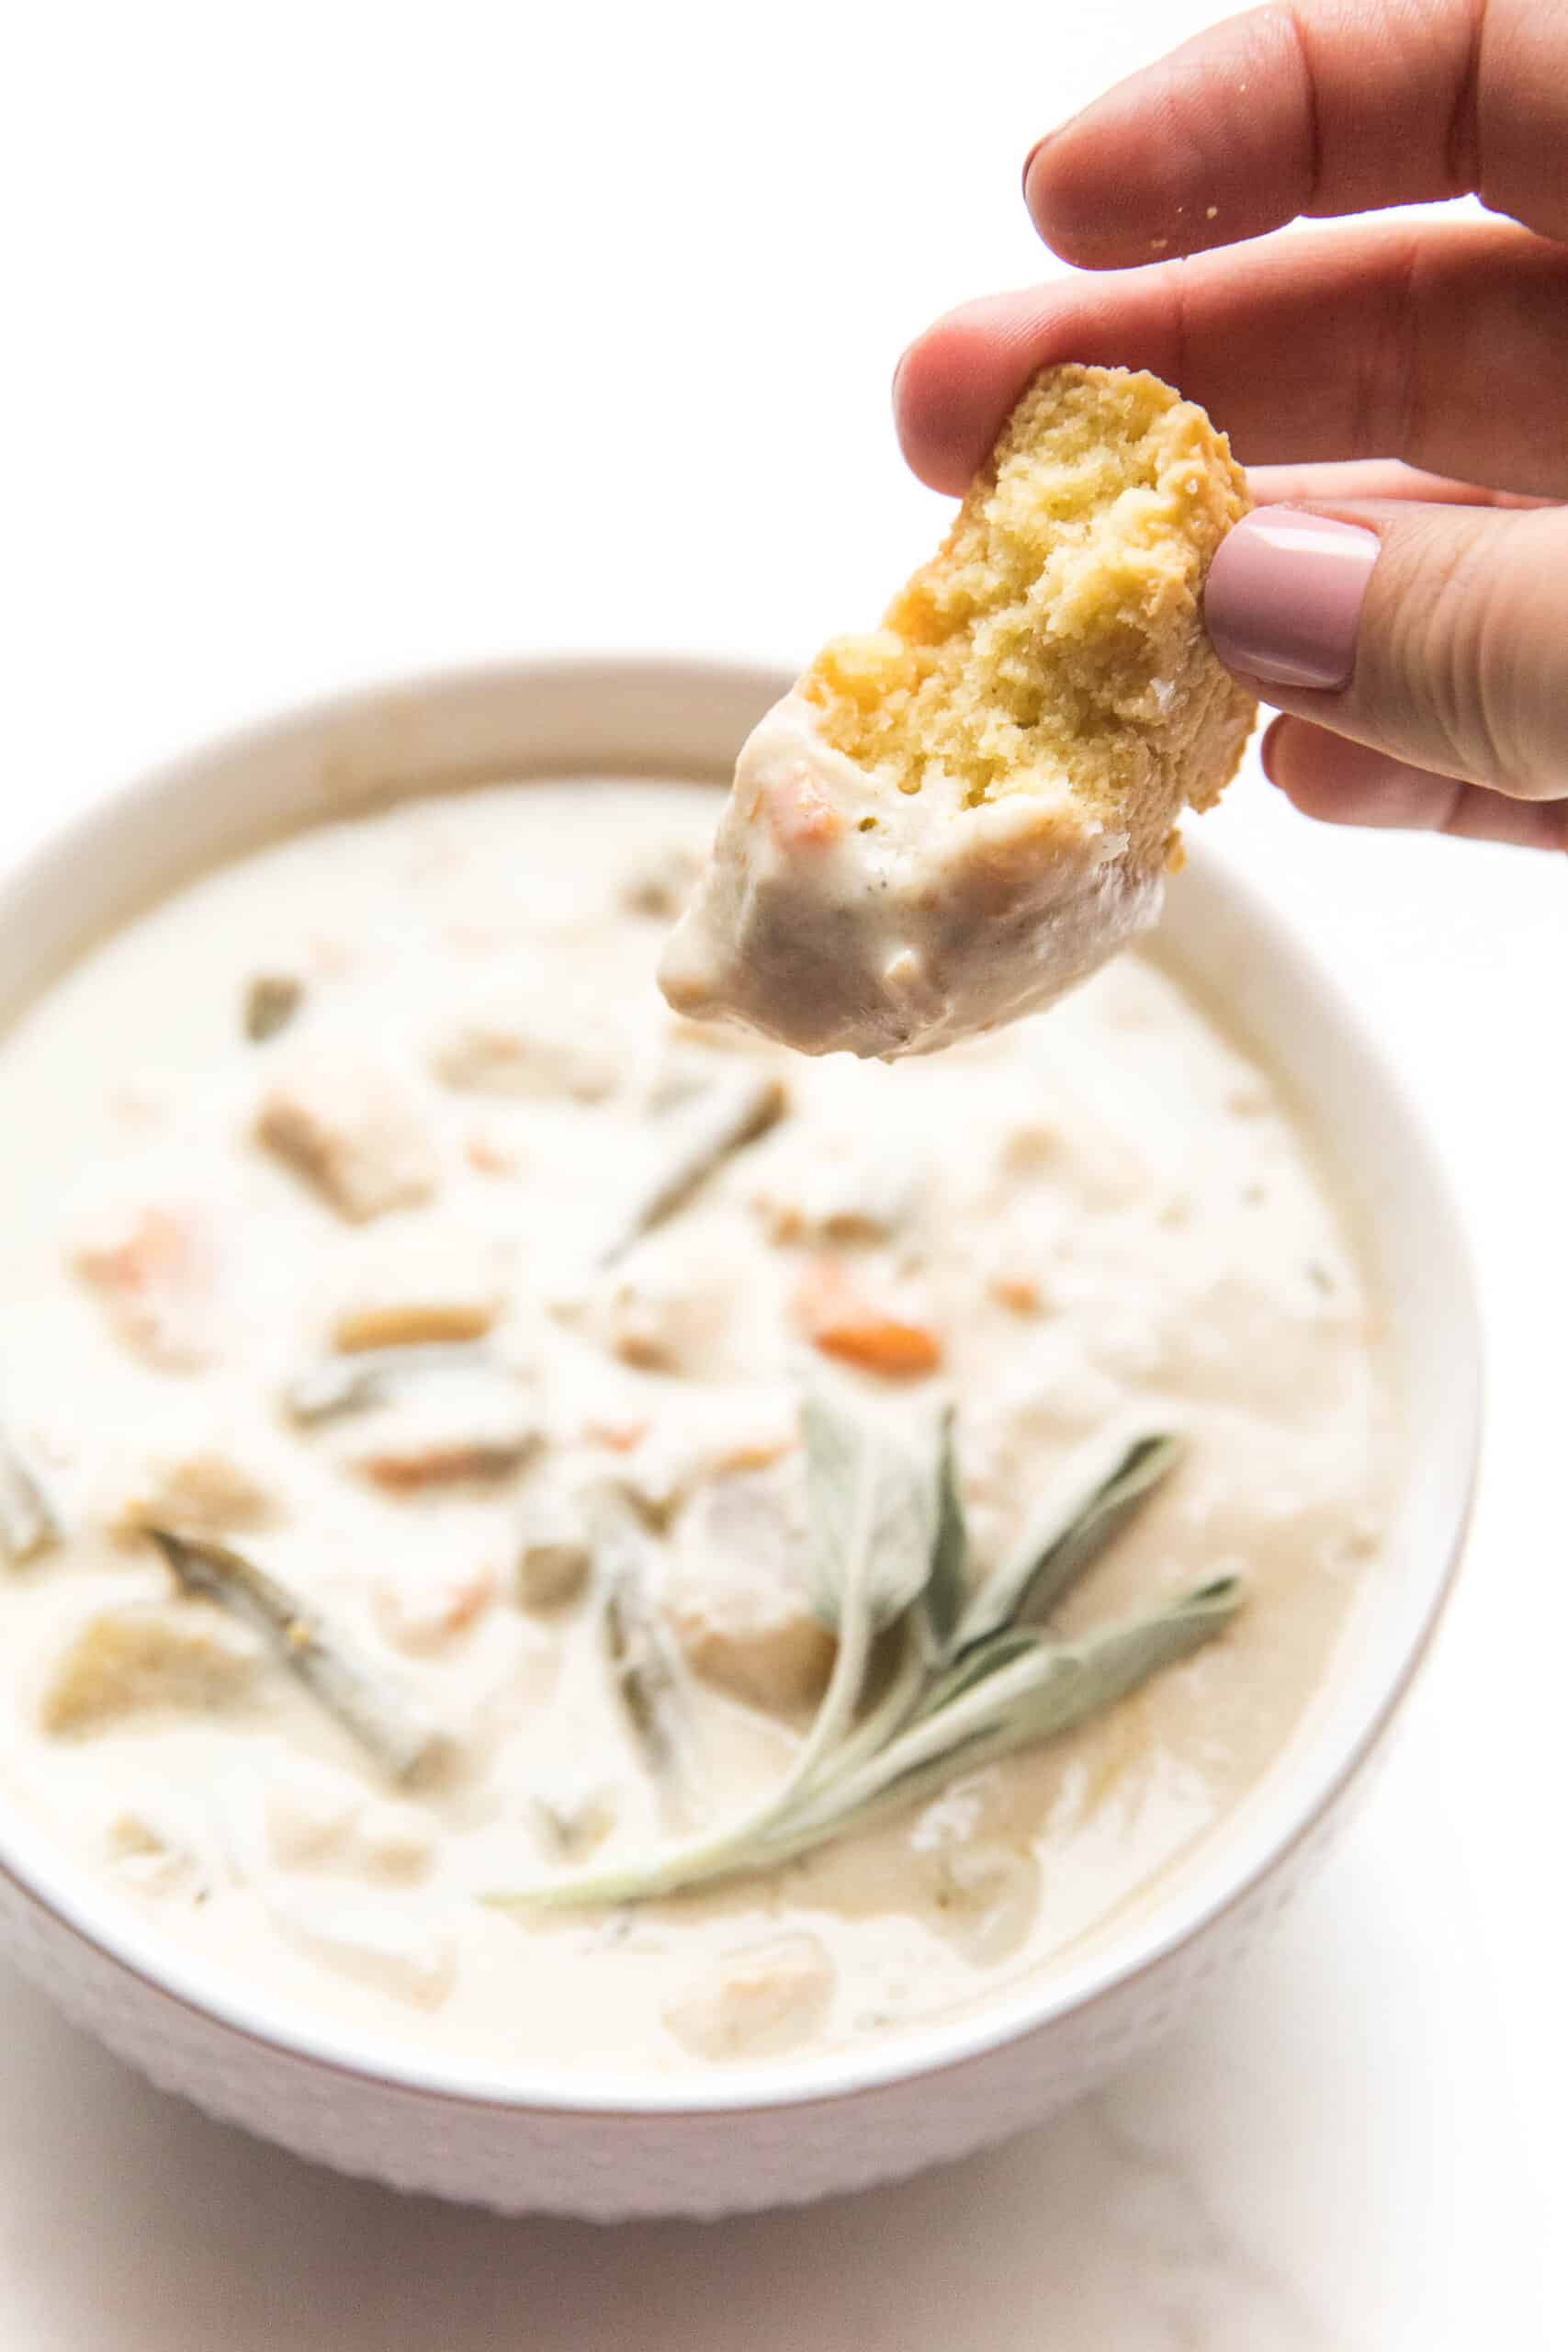 dipping a keto biscuit in creamy chicken chowder in a white bowl + background